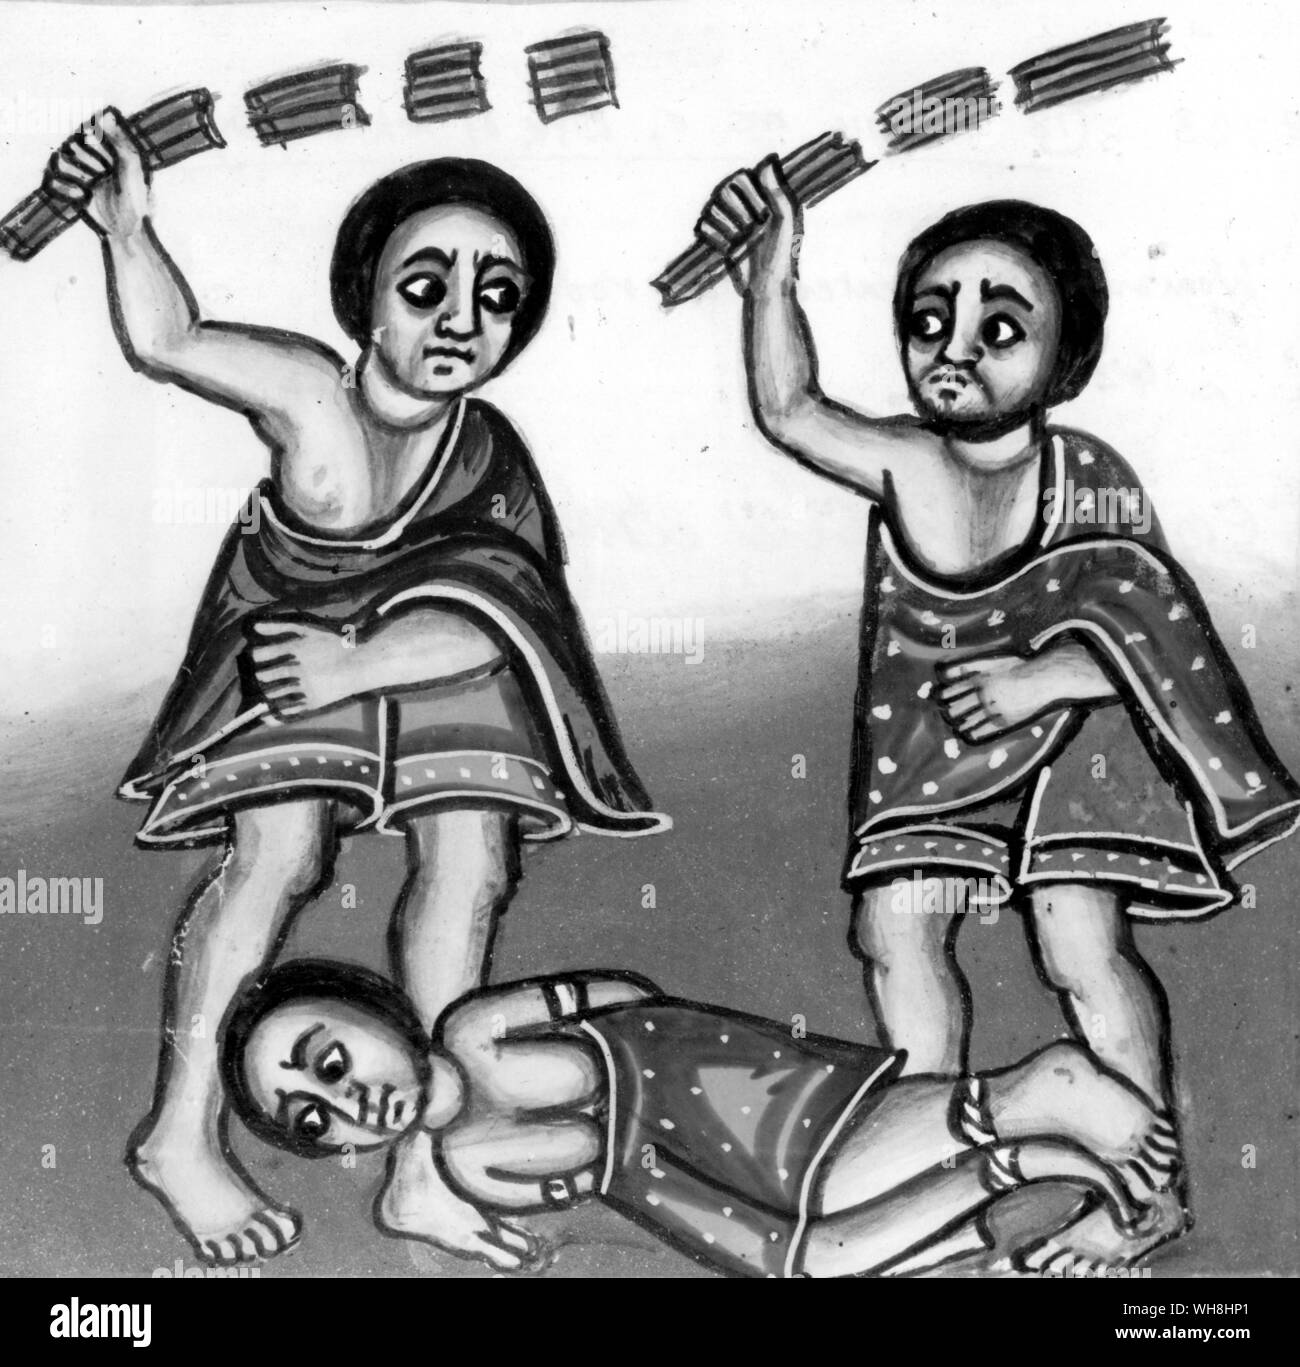 The tribulations of Ethiopia - woman being beaten with rods - Ethiopian manuscripts. The African Adventure - A History of Africa's Explorers by Timothy Severin, page 43. Stock Photo